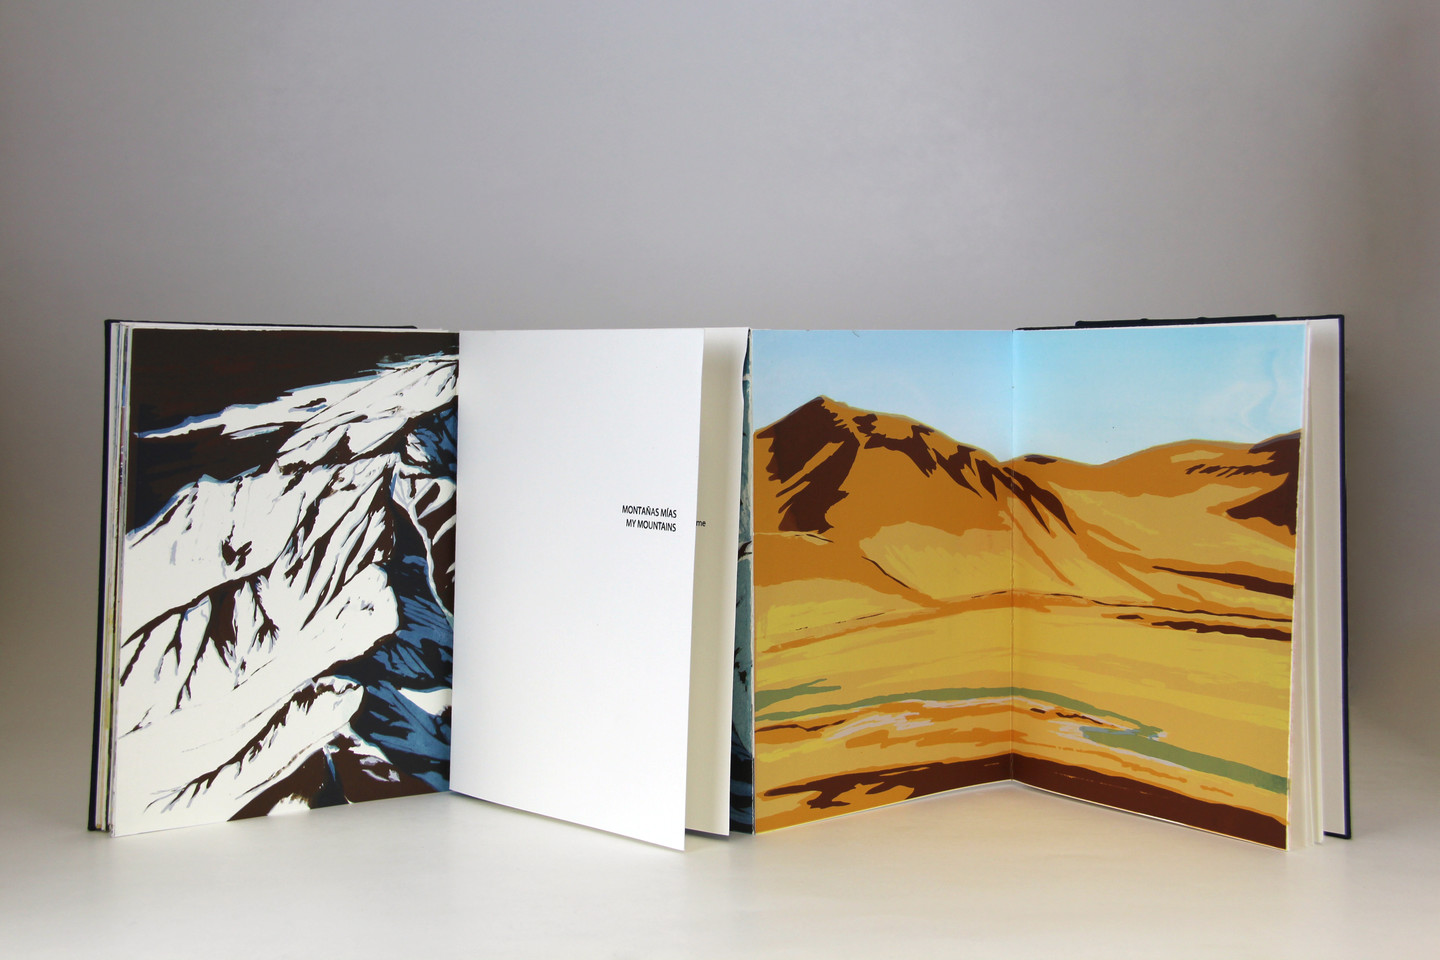 Four leaves of an open book depict mountain ranges. One image shows snow-capped mountains in blue, black and white; the other image depicts a low mountain in desert colors of beige, brown and yellow with a stream in the foreground.